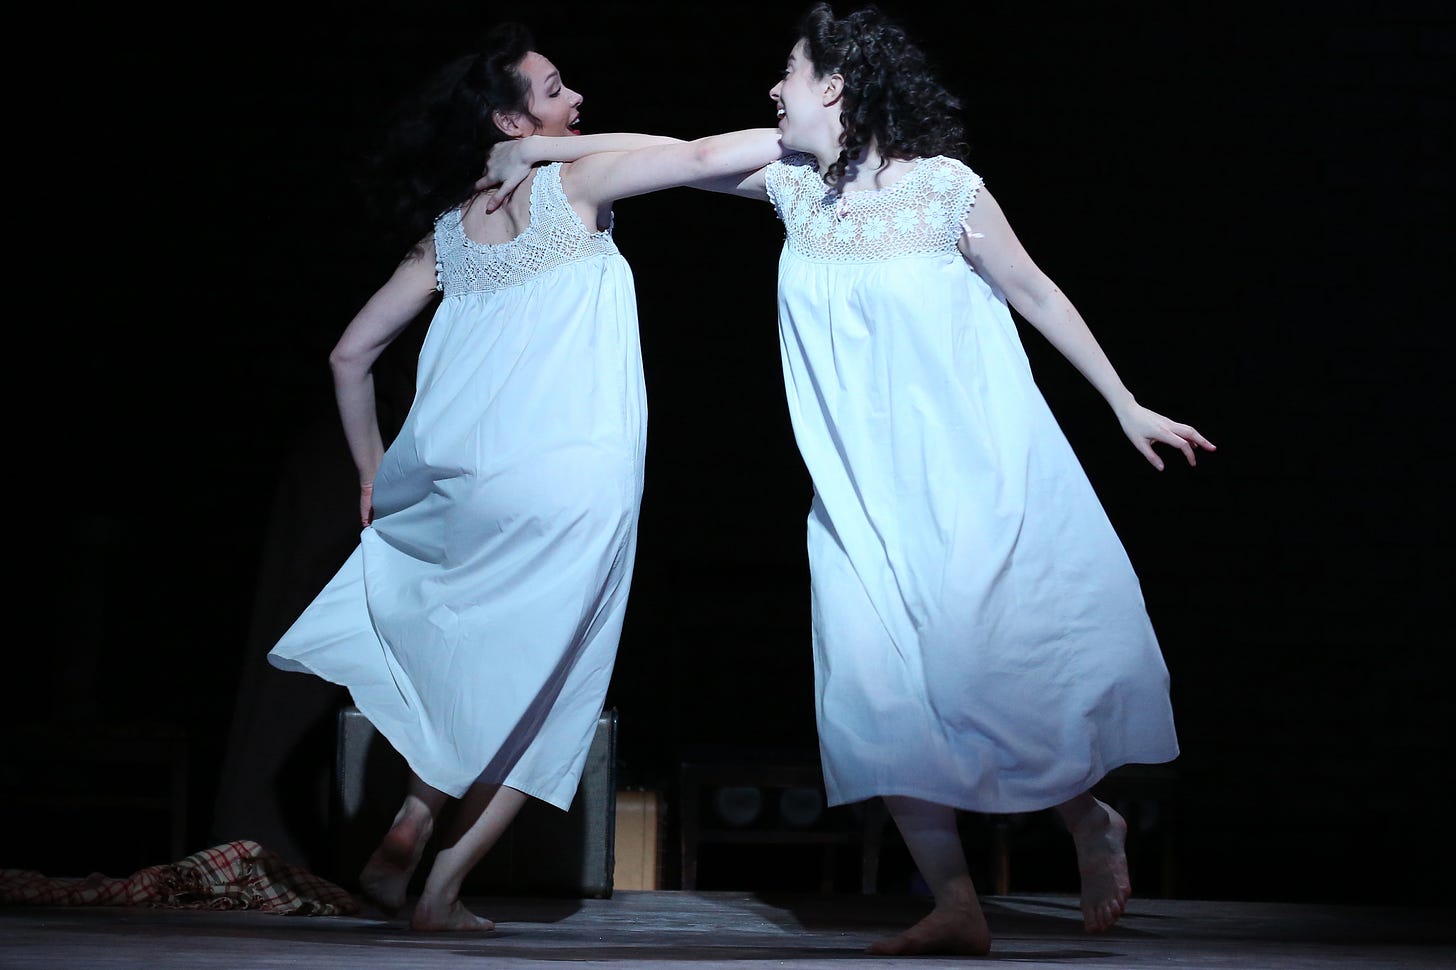 Indecent': A Play About A Yiddish Play That Was Ahead Of Its Time : NPR